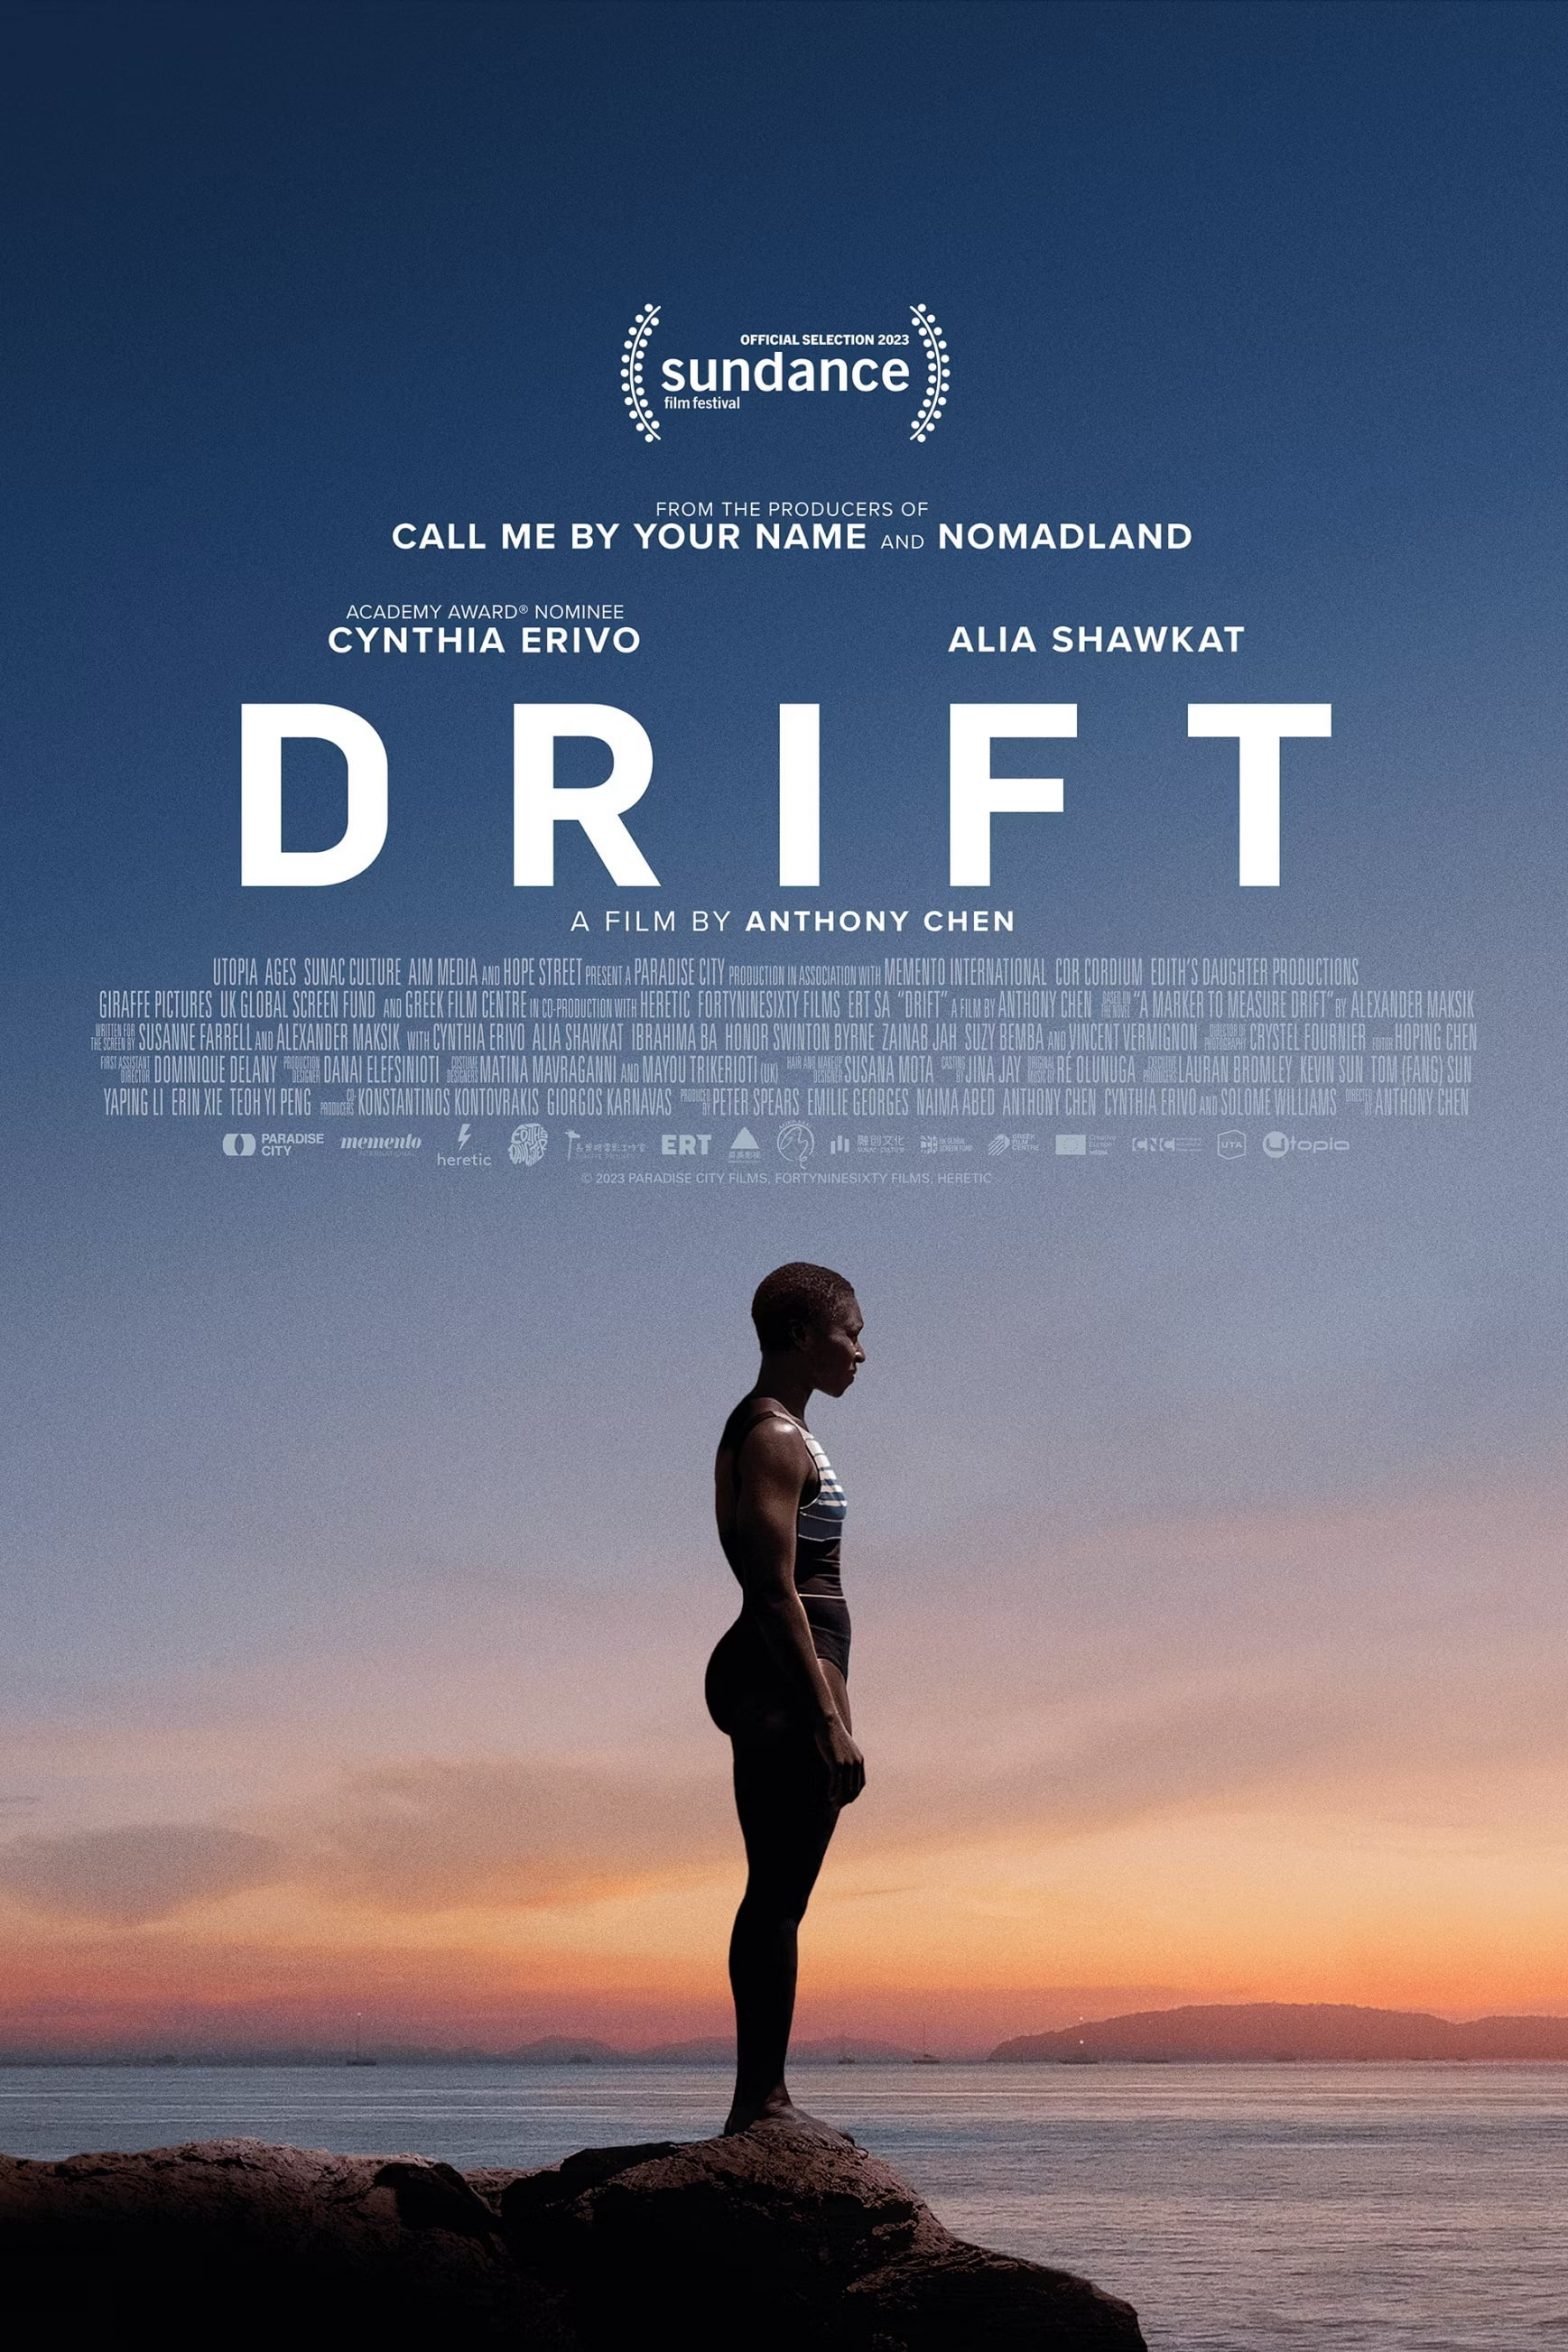 Poster for the movie "Drift"